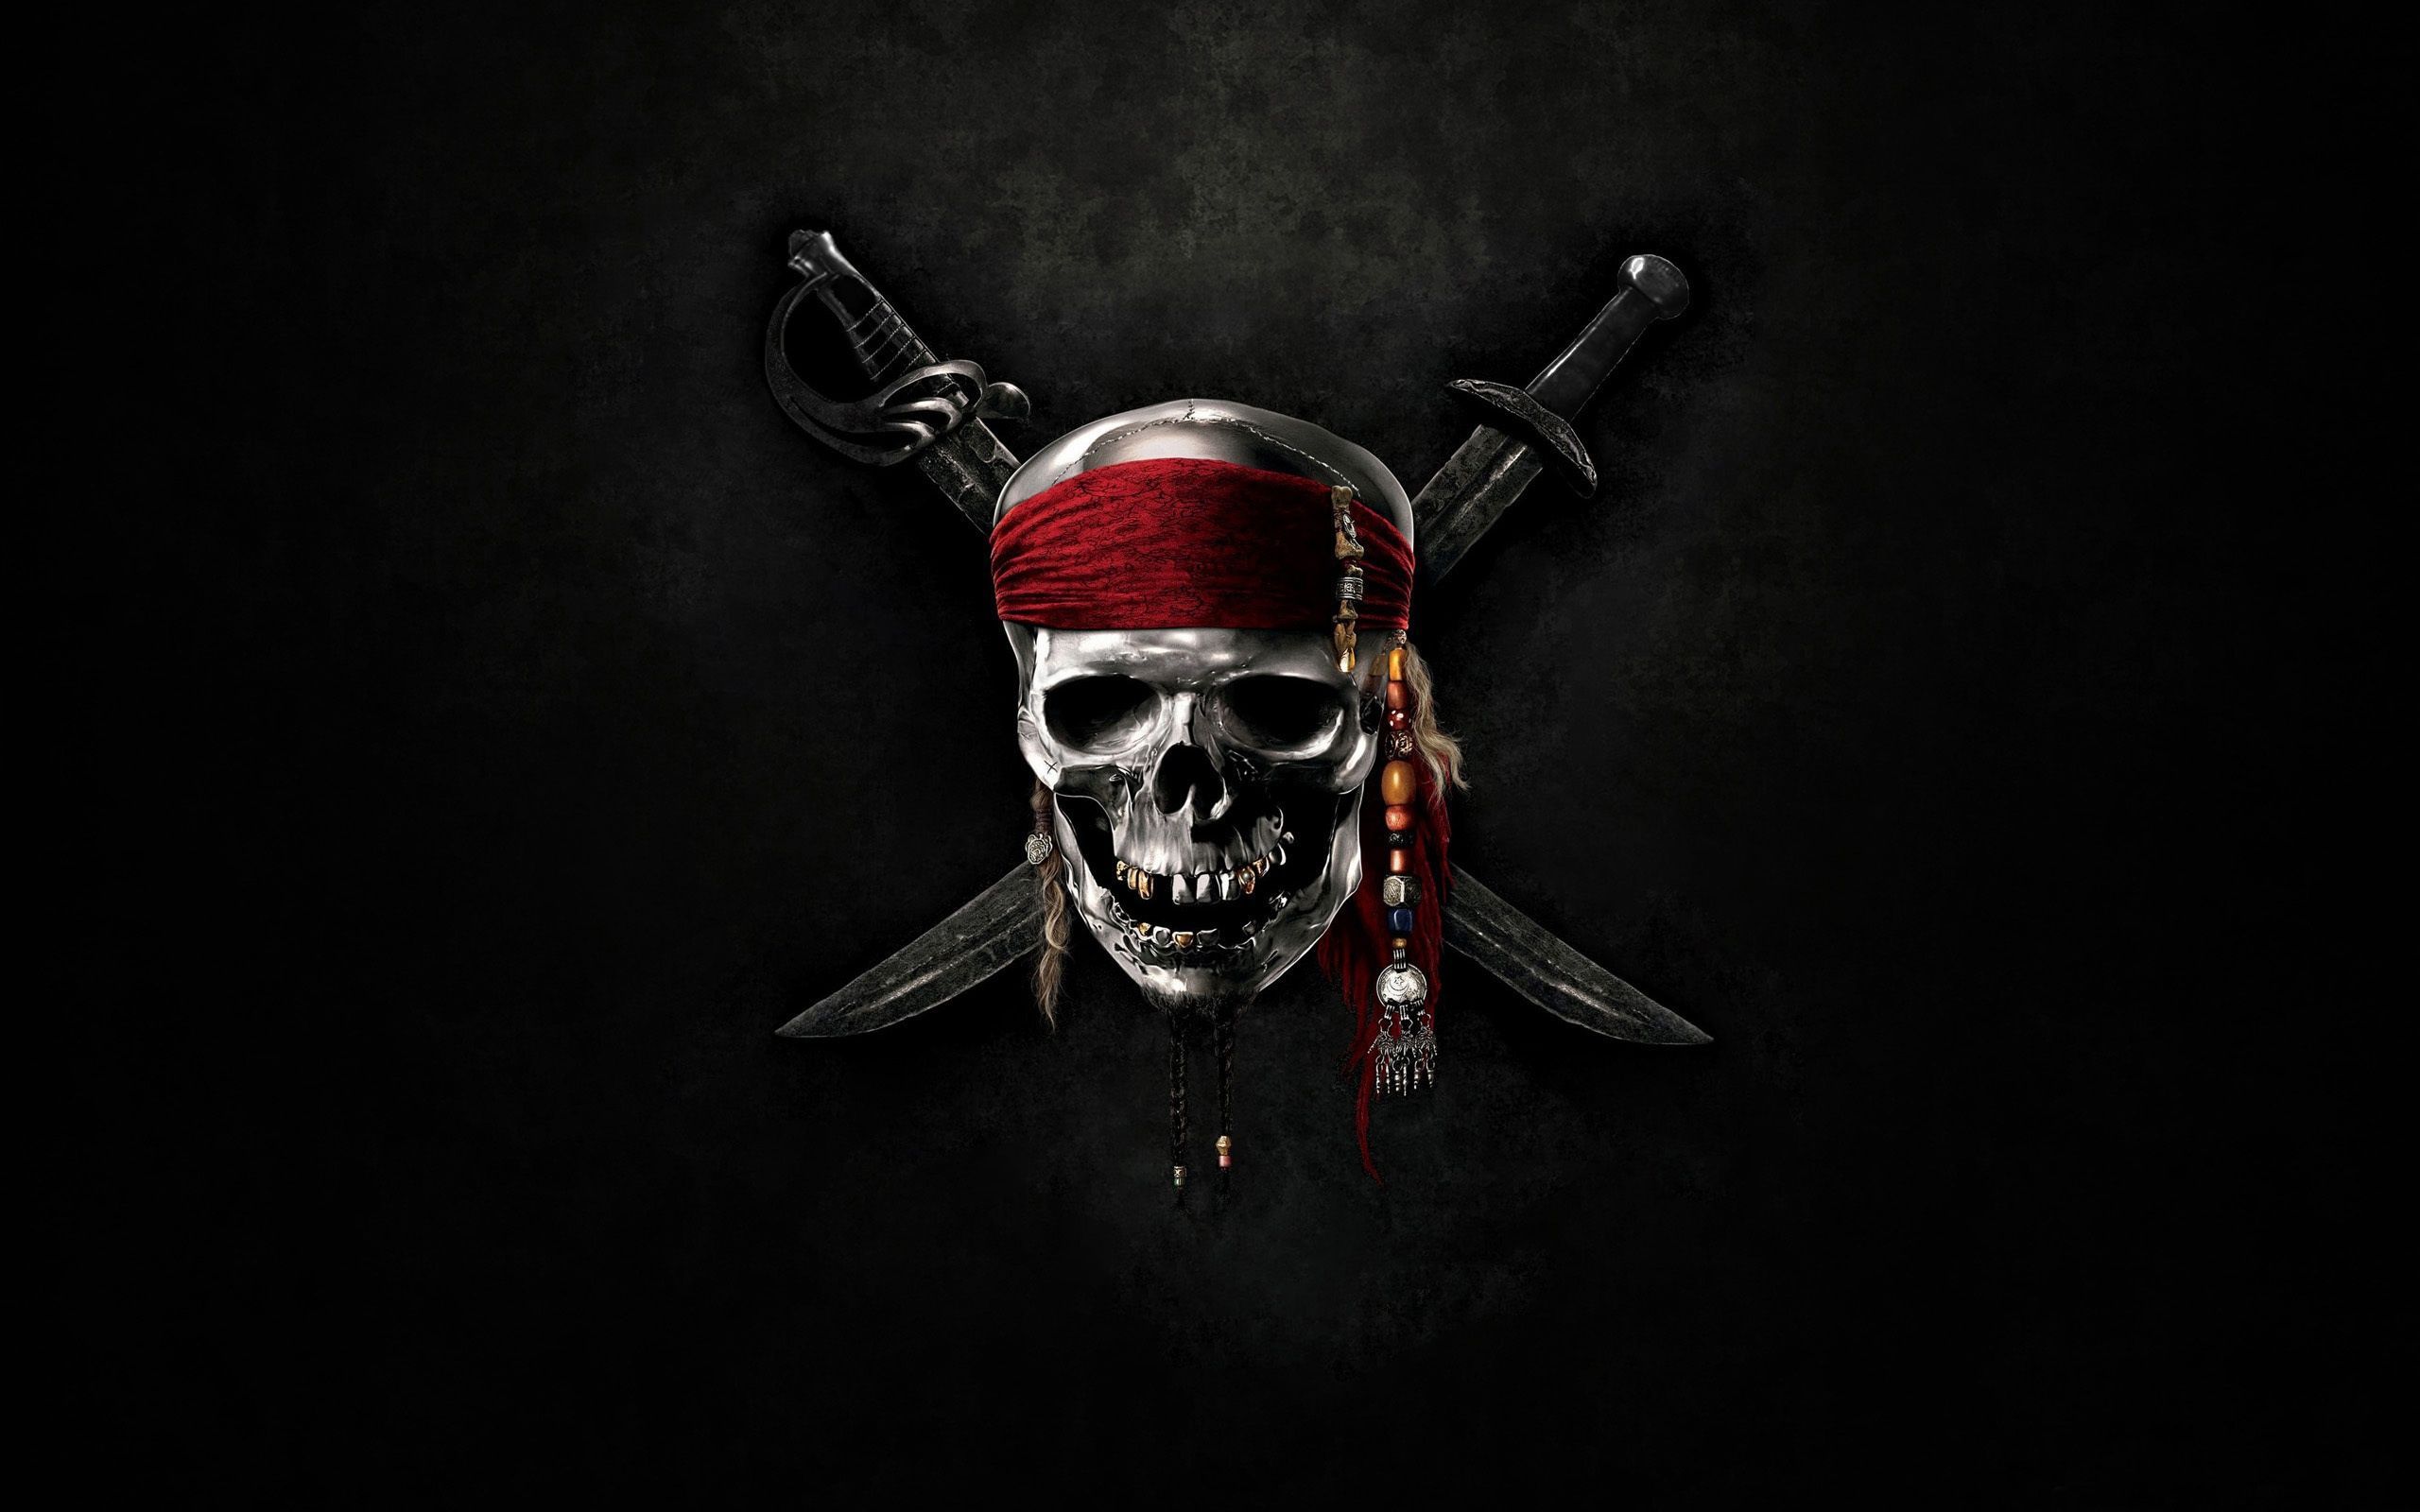 pirate photo and image. Windows Pirate Wallpaper. On stranger tides, Skull wallpaper, Pirates of the caribbean